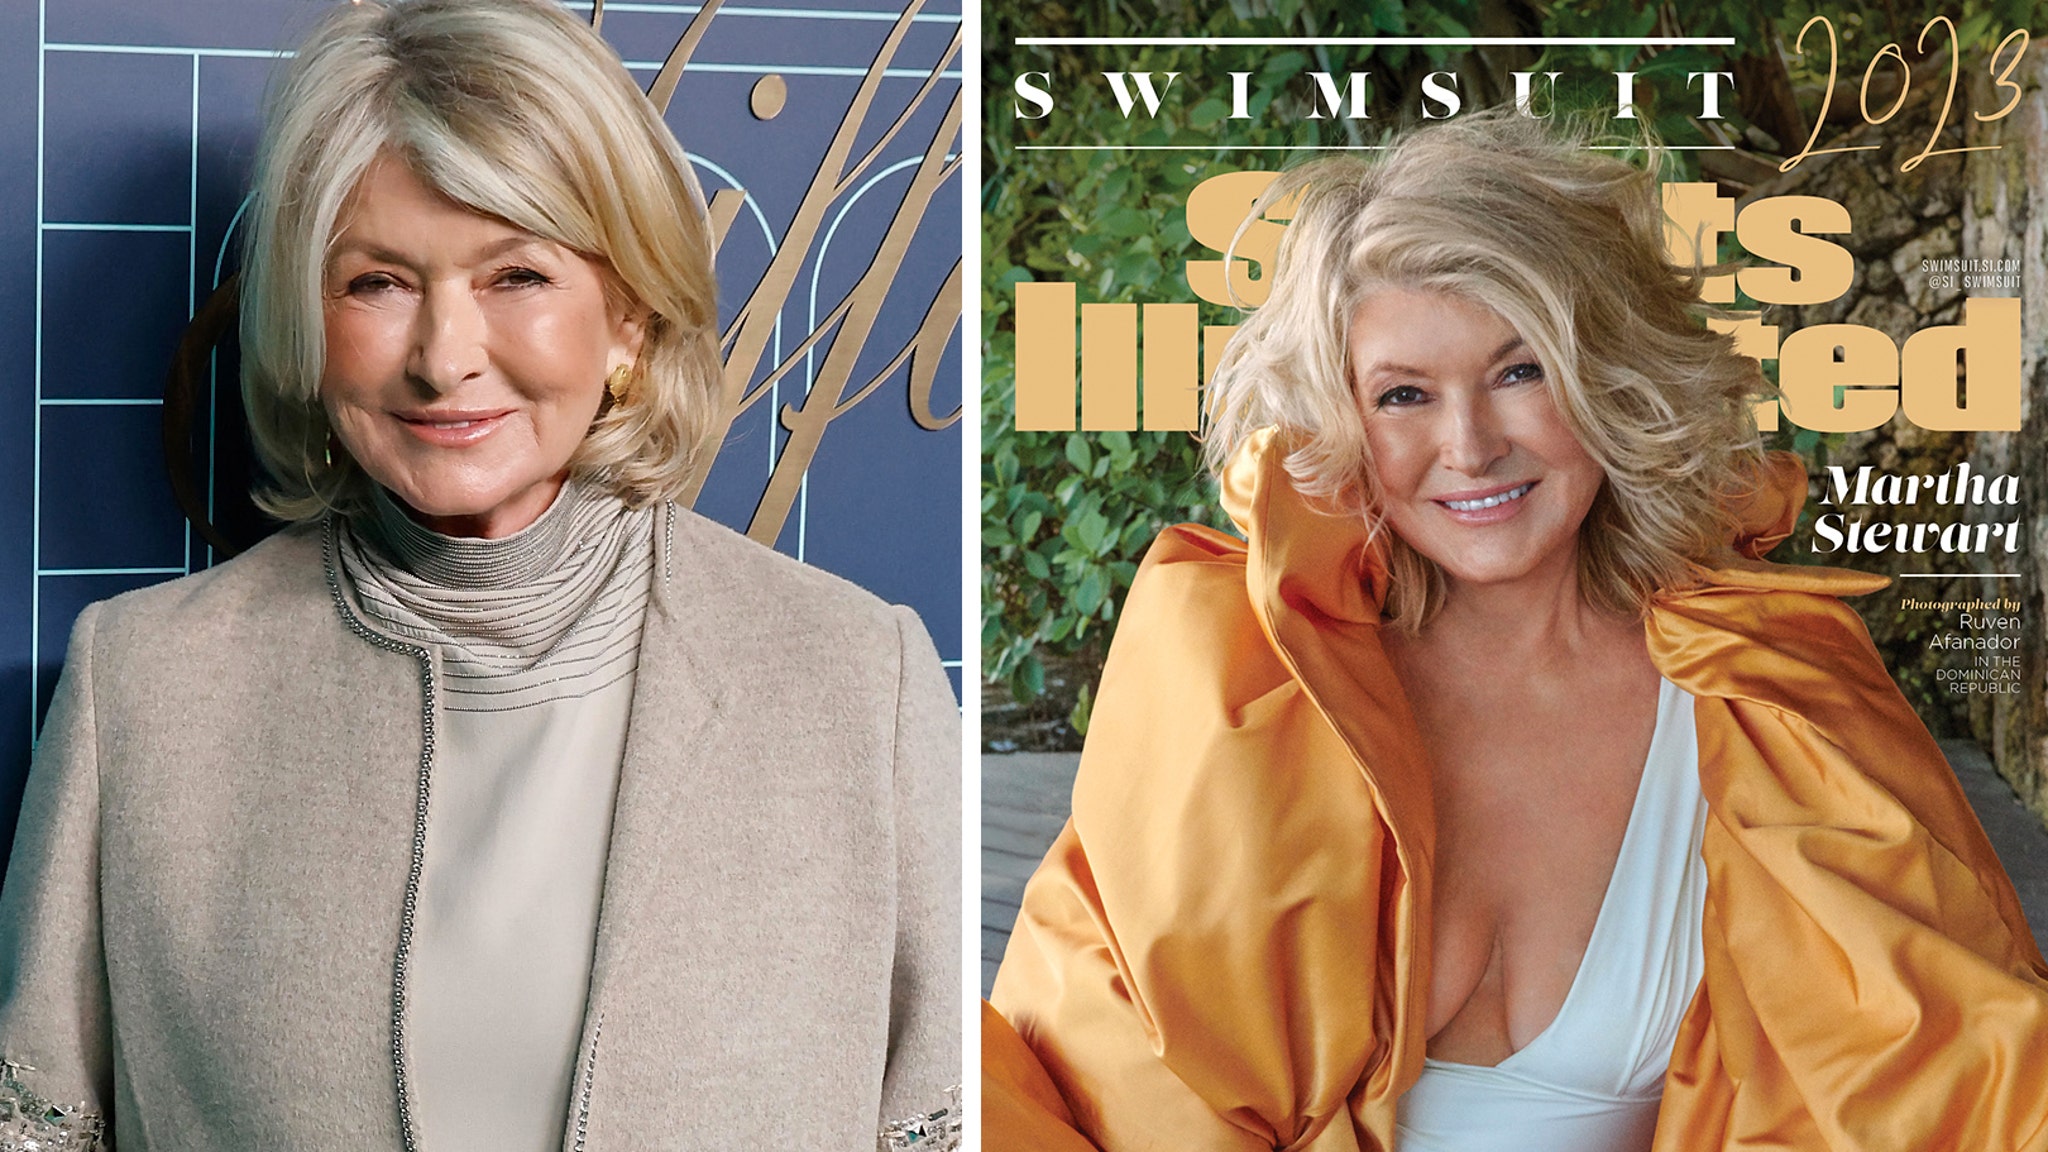 Martha Stewart Admits To One Cosmetic Procedure But Denies Plastic Surgery After Sports